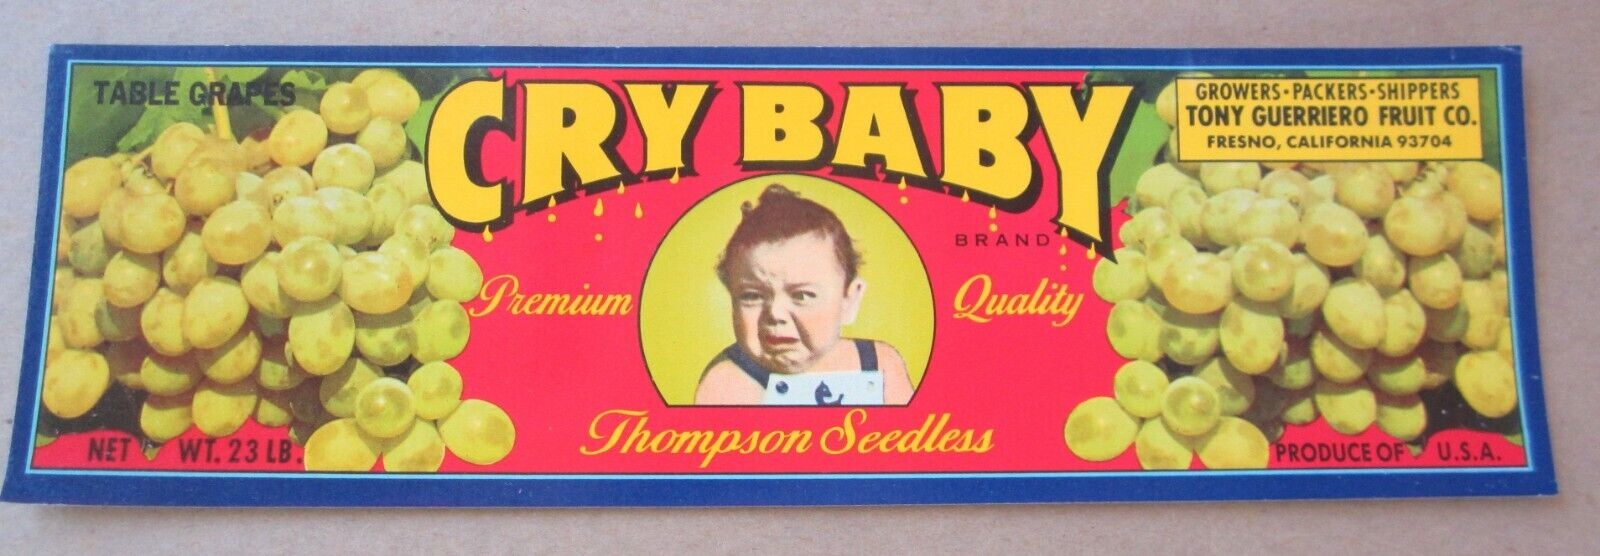 Old Vintage - CRY BABY - Grape LABEL - Fresno CA. 